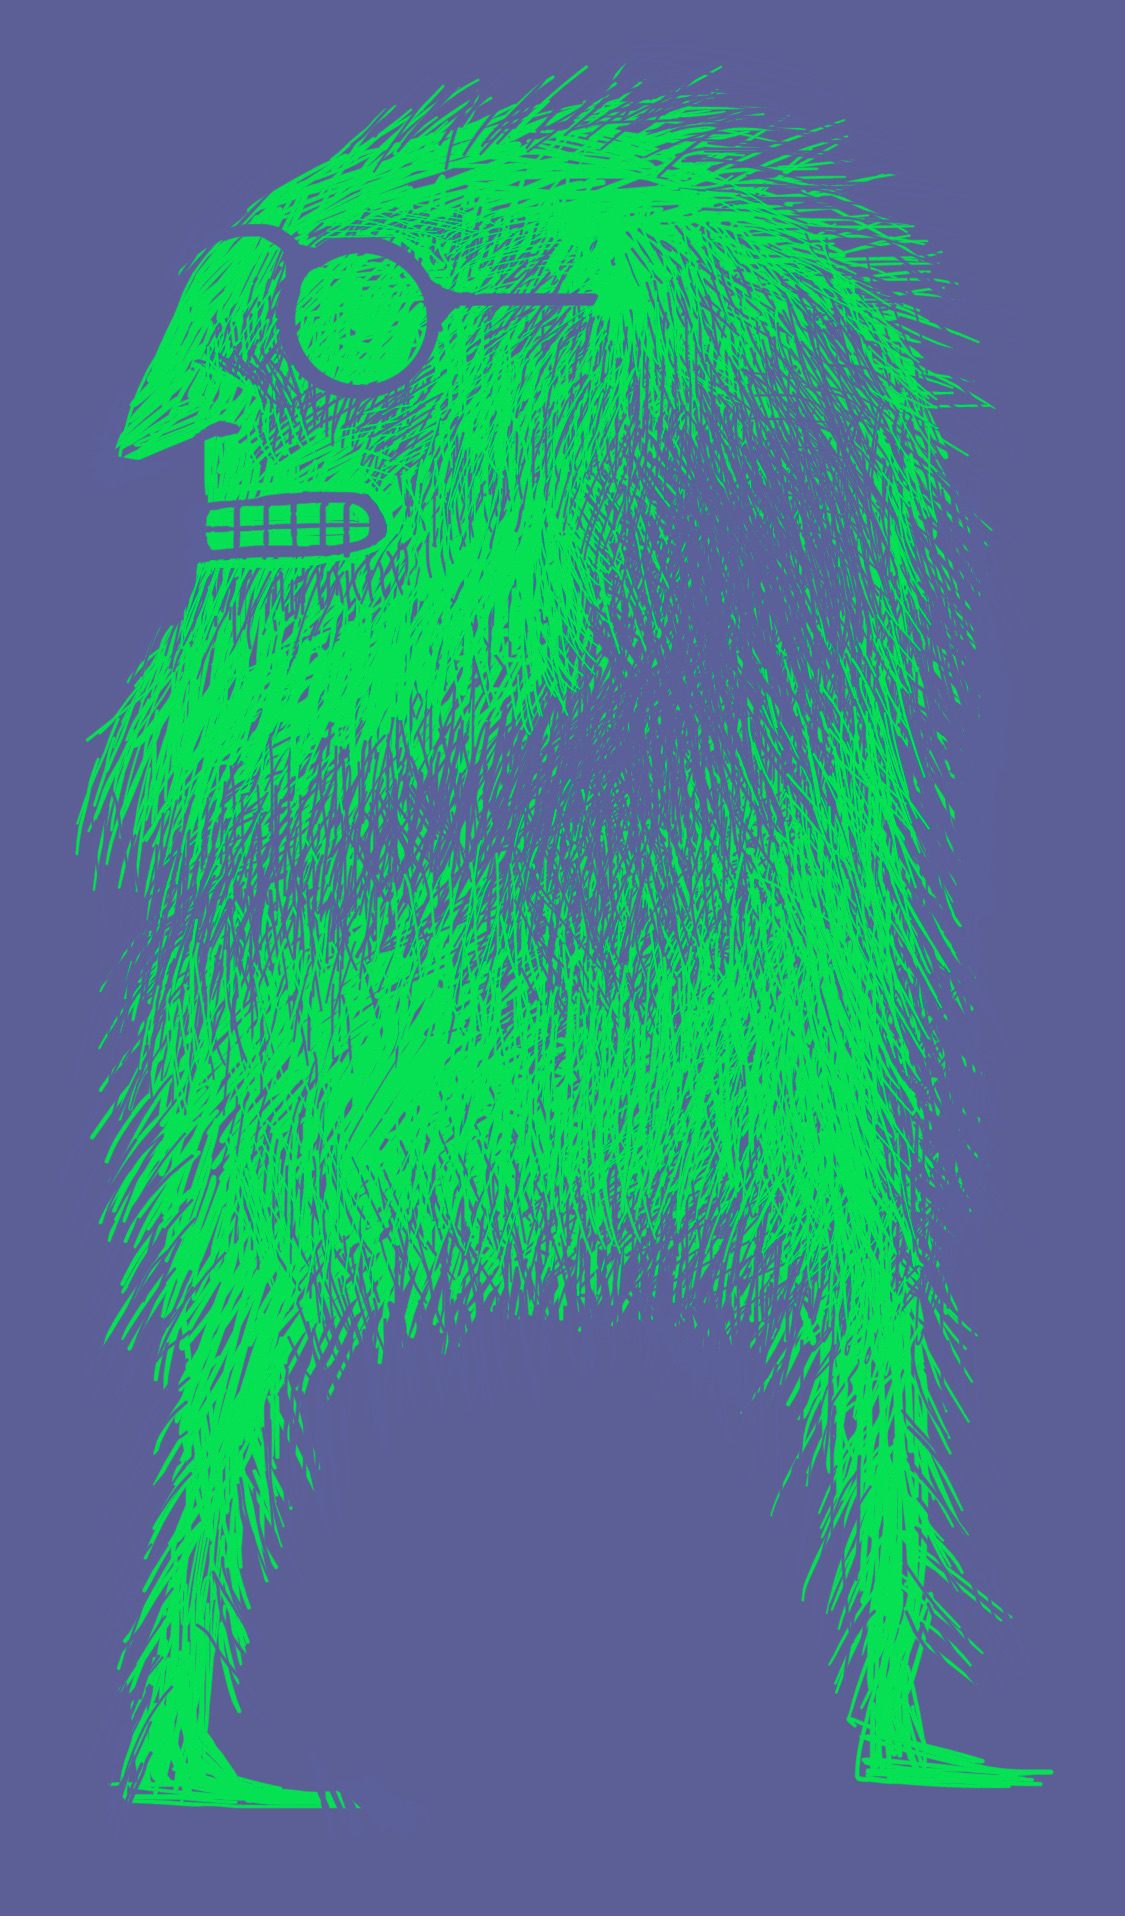 A green furry person with glasses and a beard